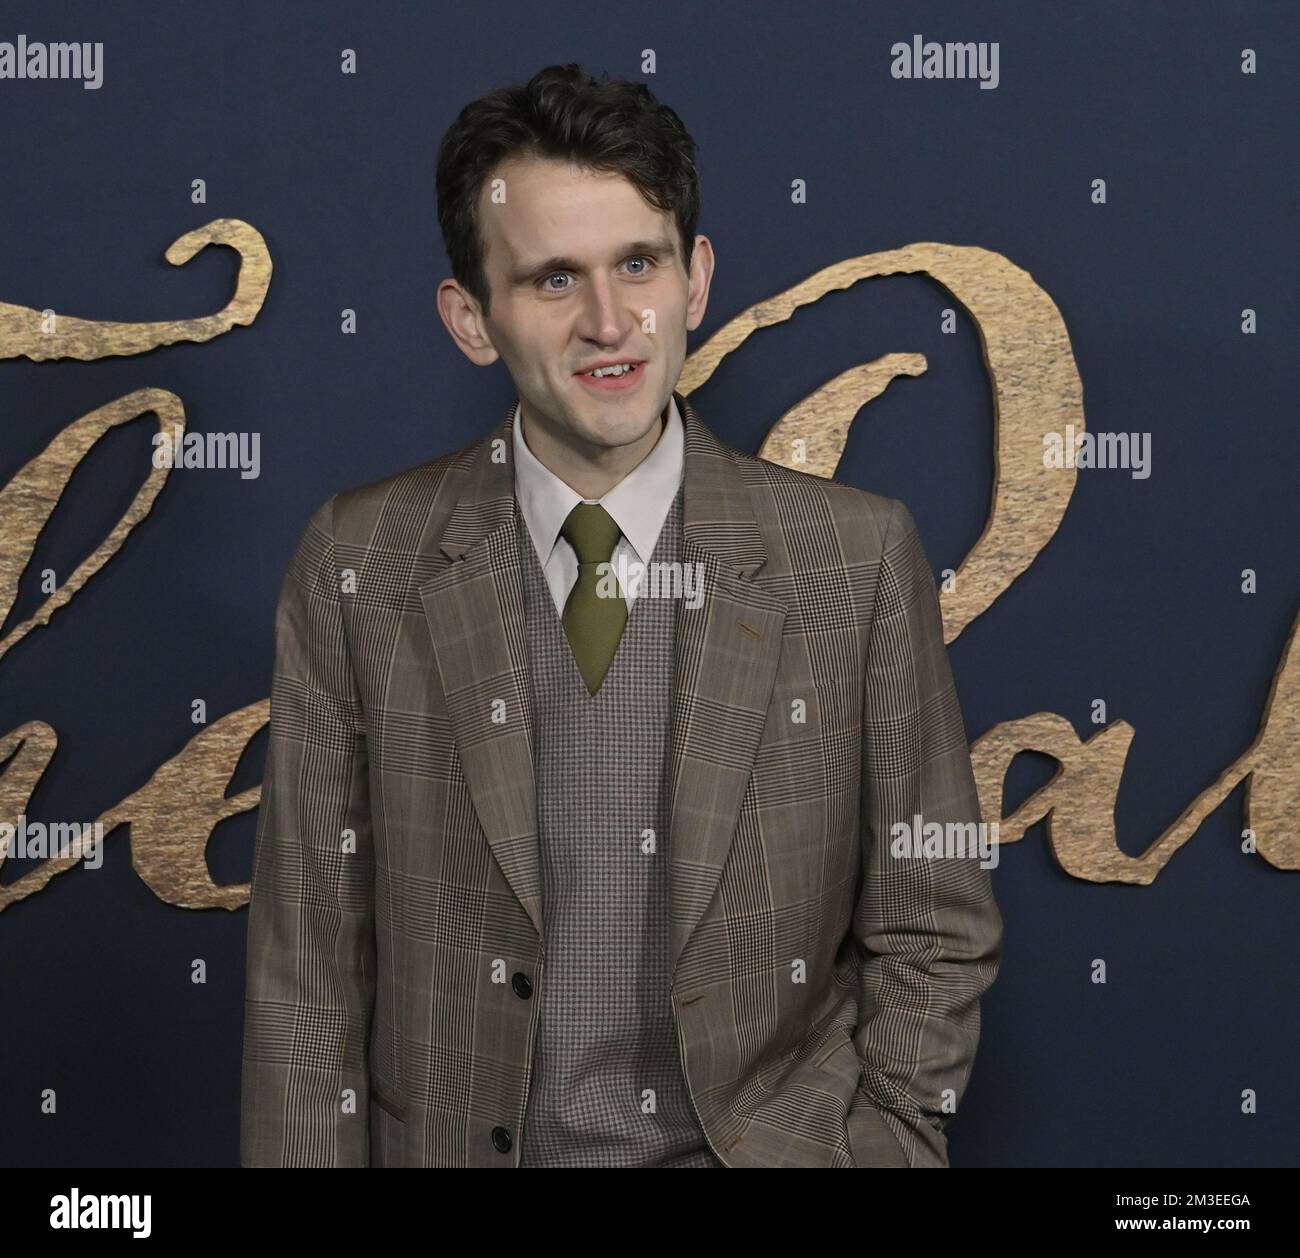 https://c8.alamy.com/comp/2M3EEGA/los-angeles-united-states-14th-dec-2022-cast-member-harry-melling-attends-the-premiere-of-the-motion-picture-crime-thriller-the-pale-blue-eye-at-the-dga-theater-in-los-angeles-on-wednesday-december-14-2022-storyline-a-world-weary-detective-is-hired-to-investigate-the-murder-of-a-west-point-cadet-stymied-by-the-cadets-code-of-silence-he-enlists-one-of-their-own-to-help-unravel-the-case-a-young-man-the-world-would-come-to-know-as-edgar-allan-poe-photo-by-jim-ruymenupi-credit-upialamy-live-news-2M3EEGA.jpg